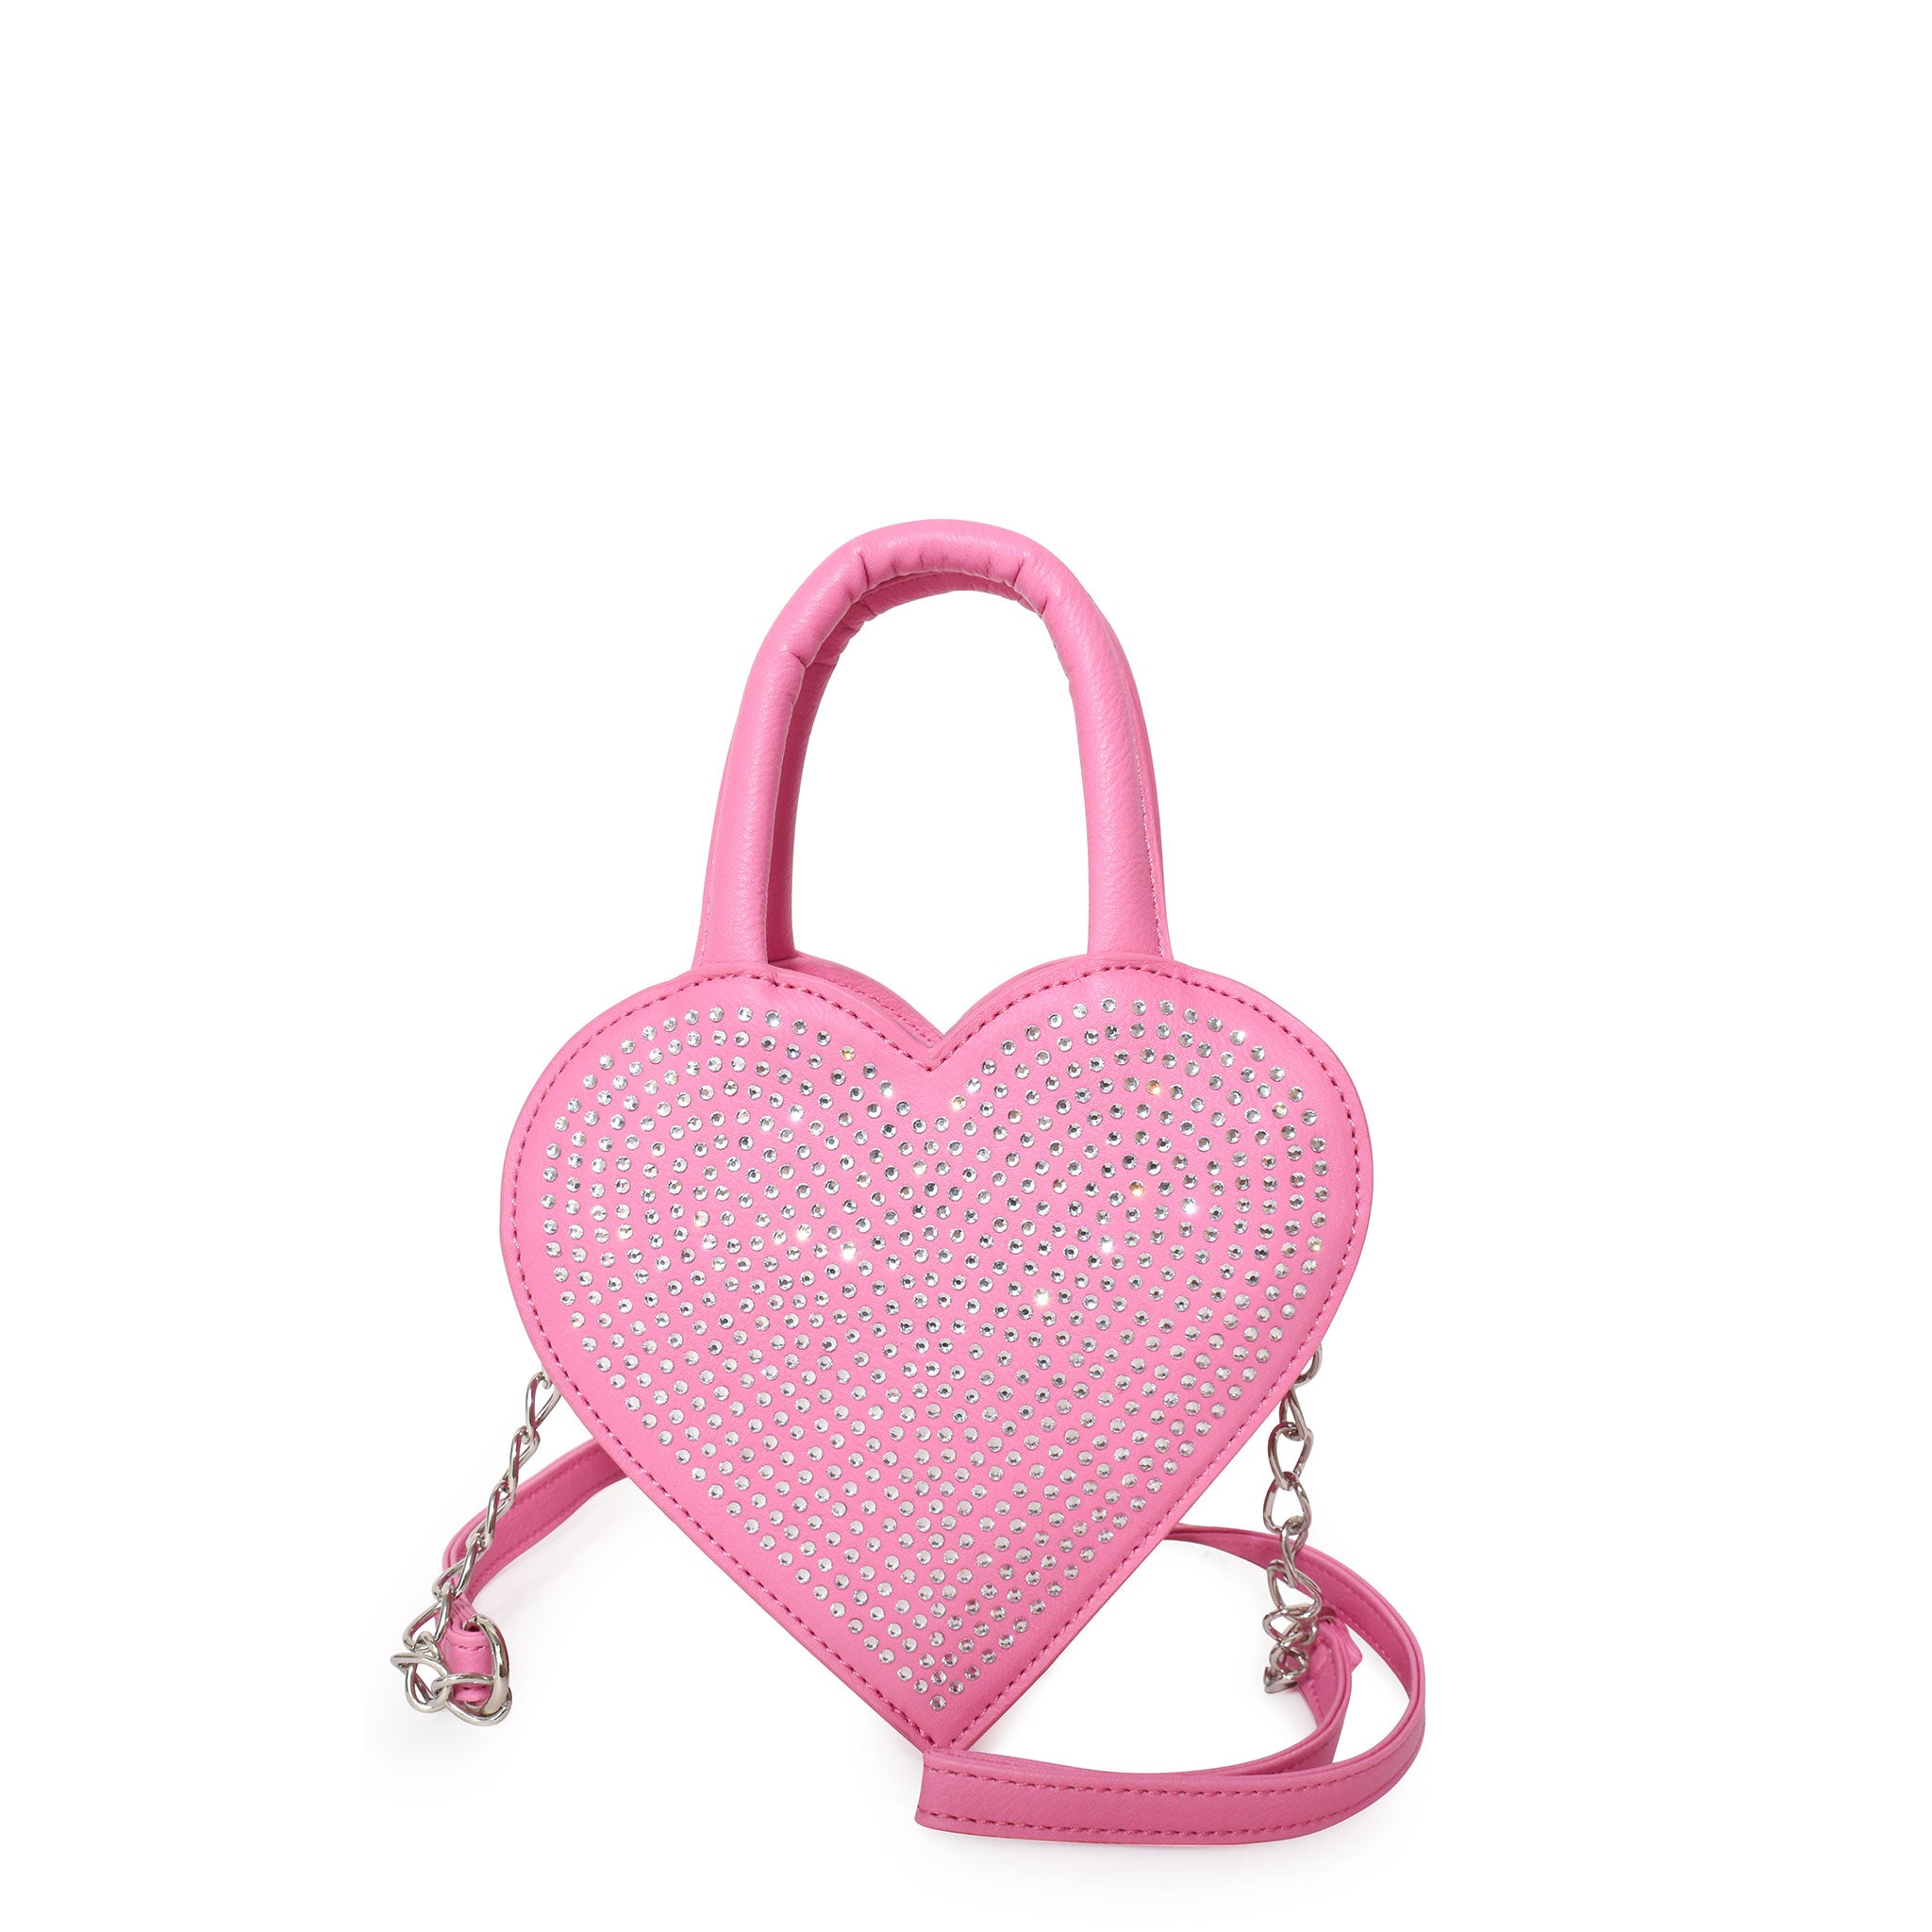 Front view of pink heart-shaped top handle crossbody bag embellished in rhinestones